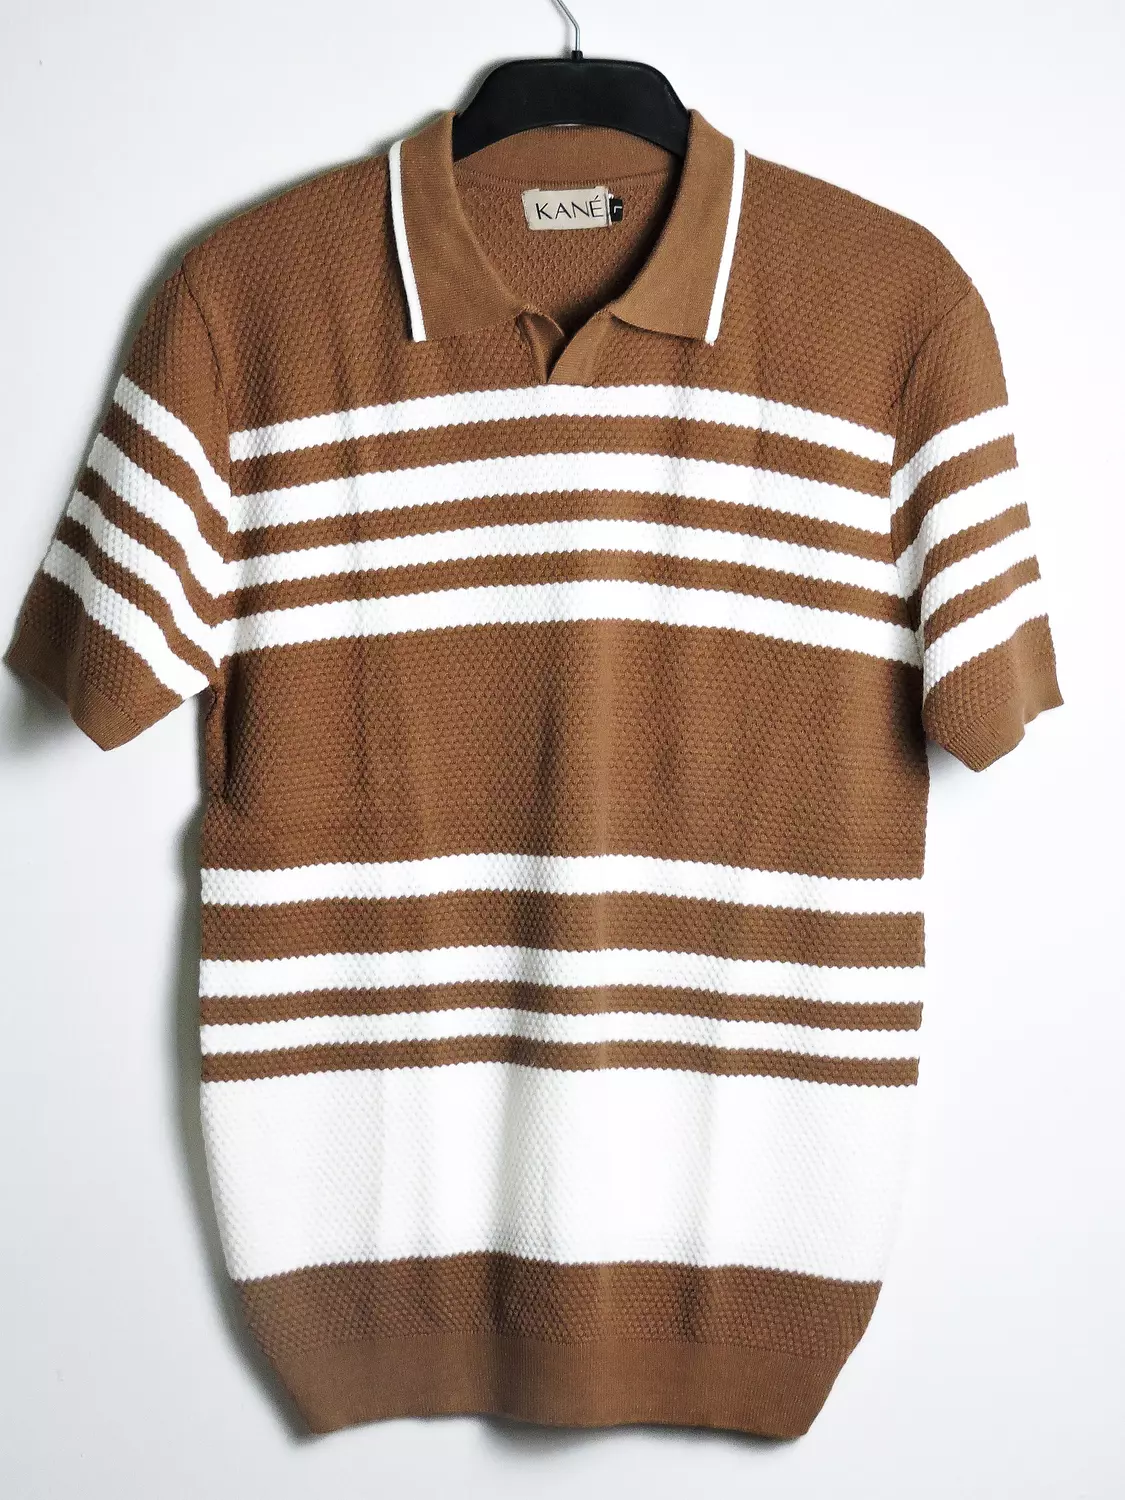 The Racing Stripe Polo *Brown & White* hover image